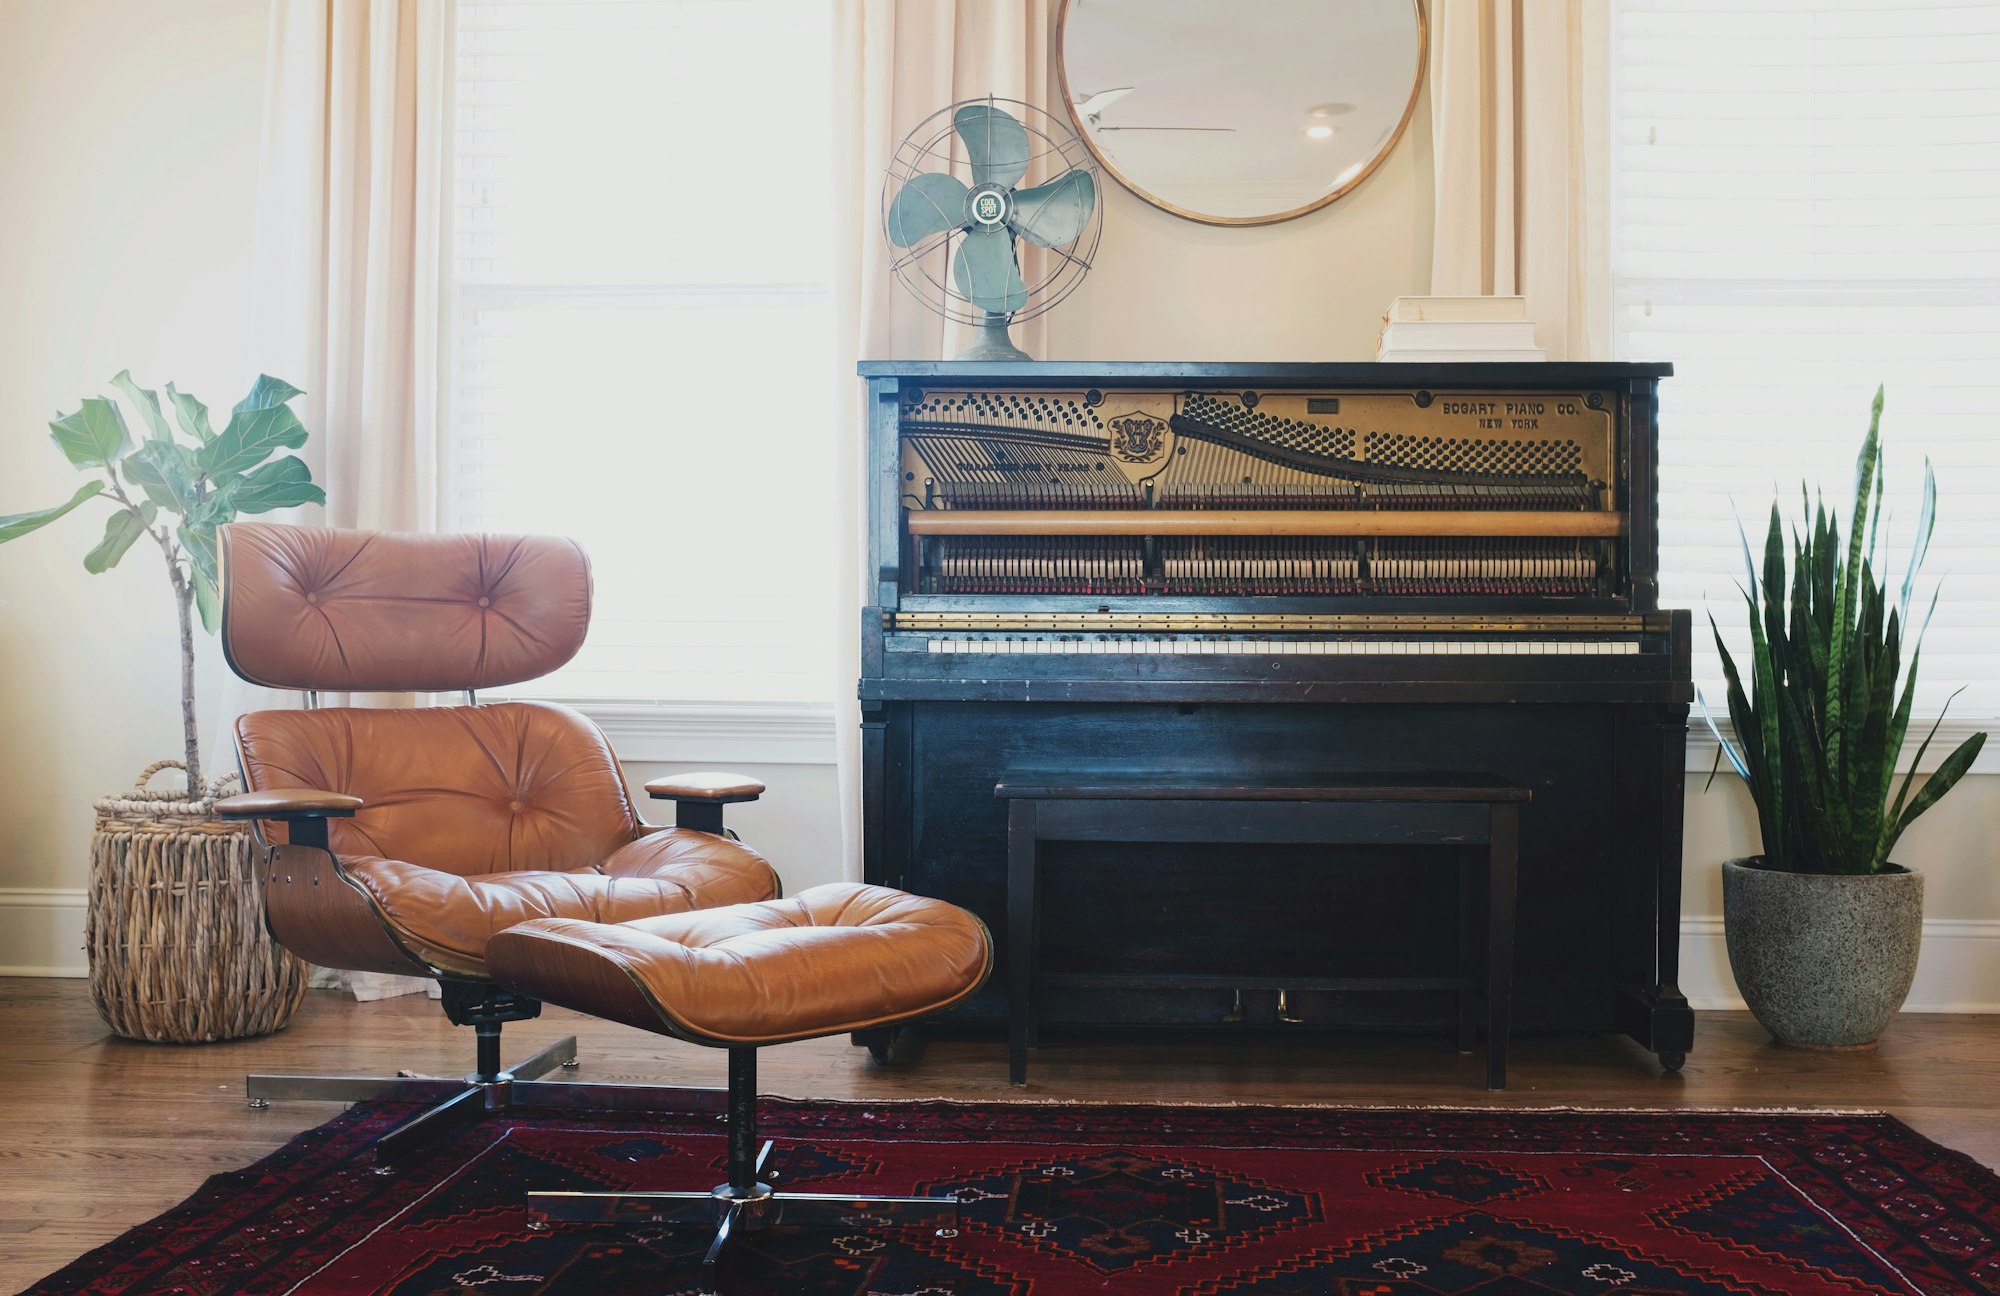 Cozy pianist’s room iconic Eames chair